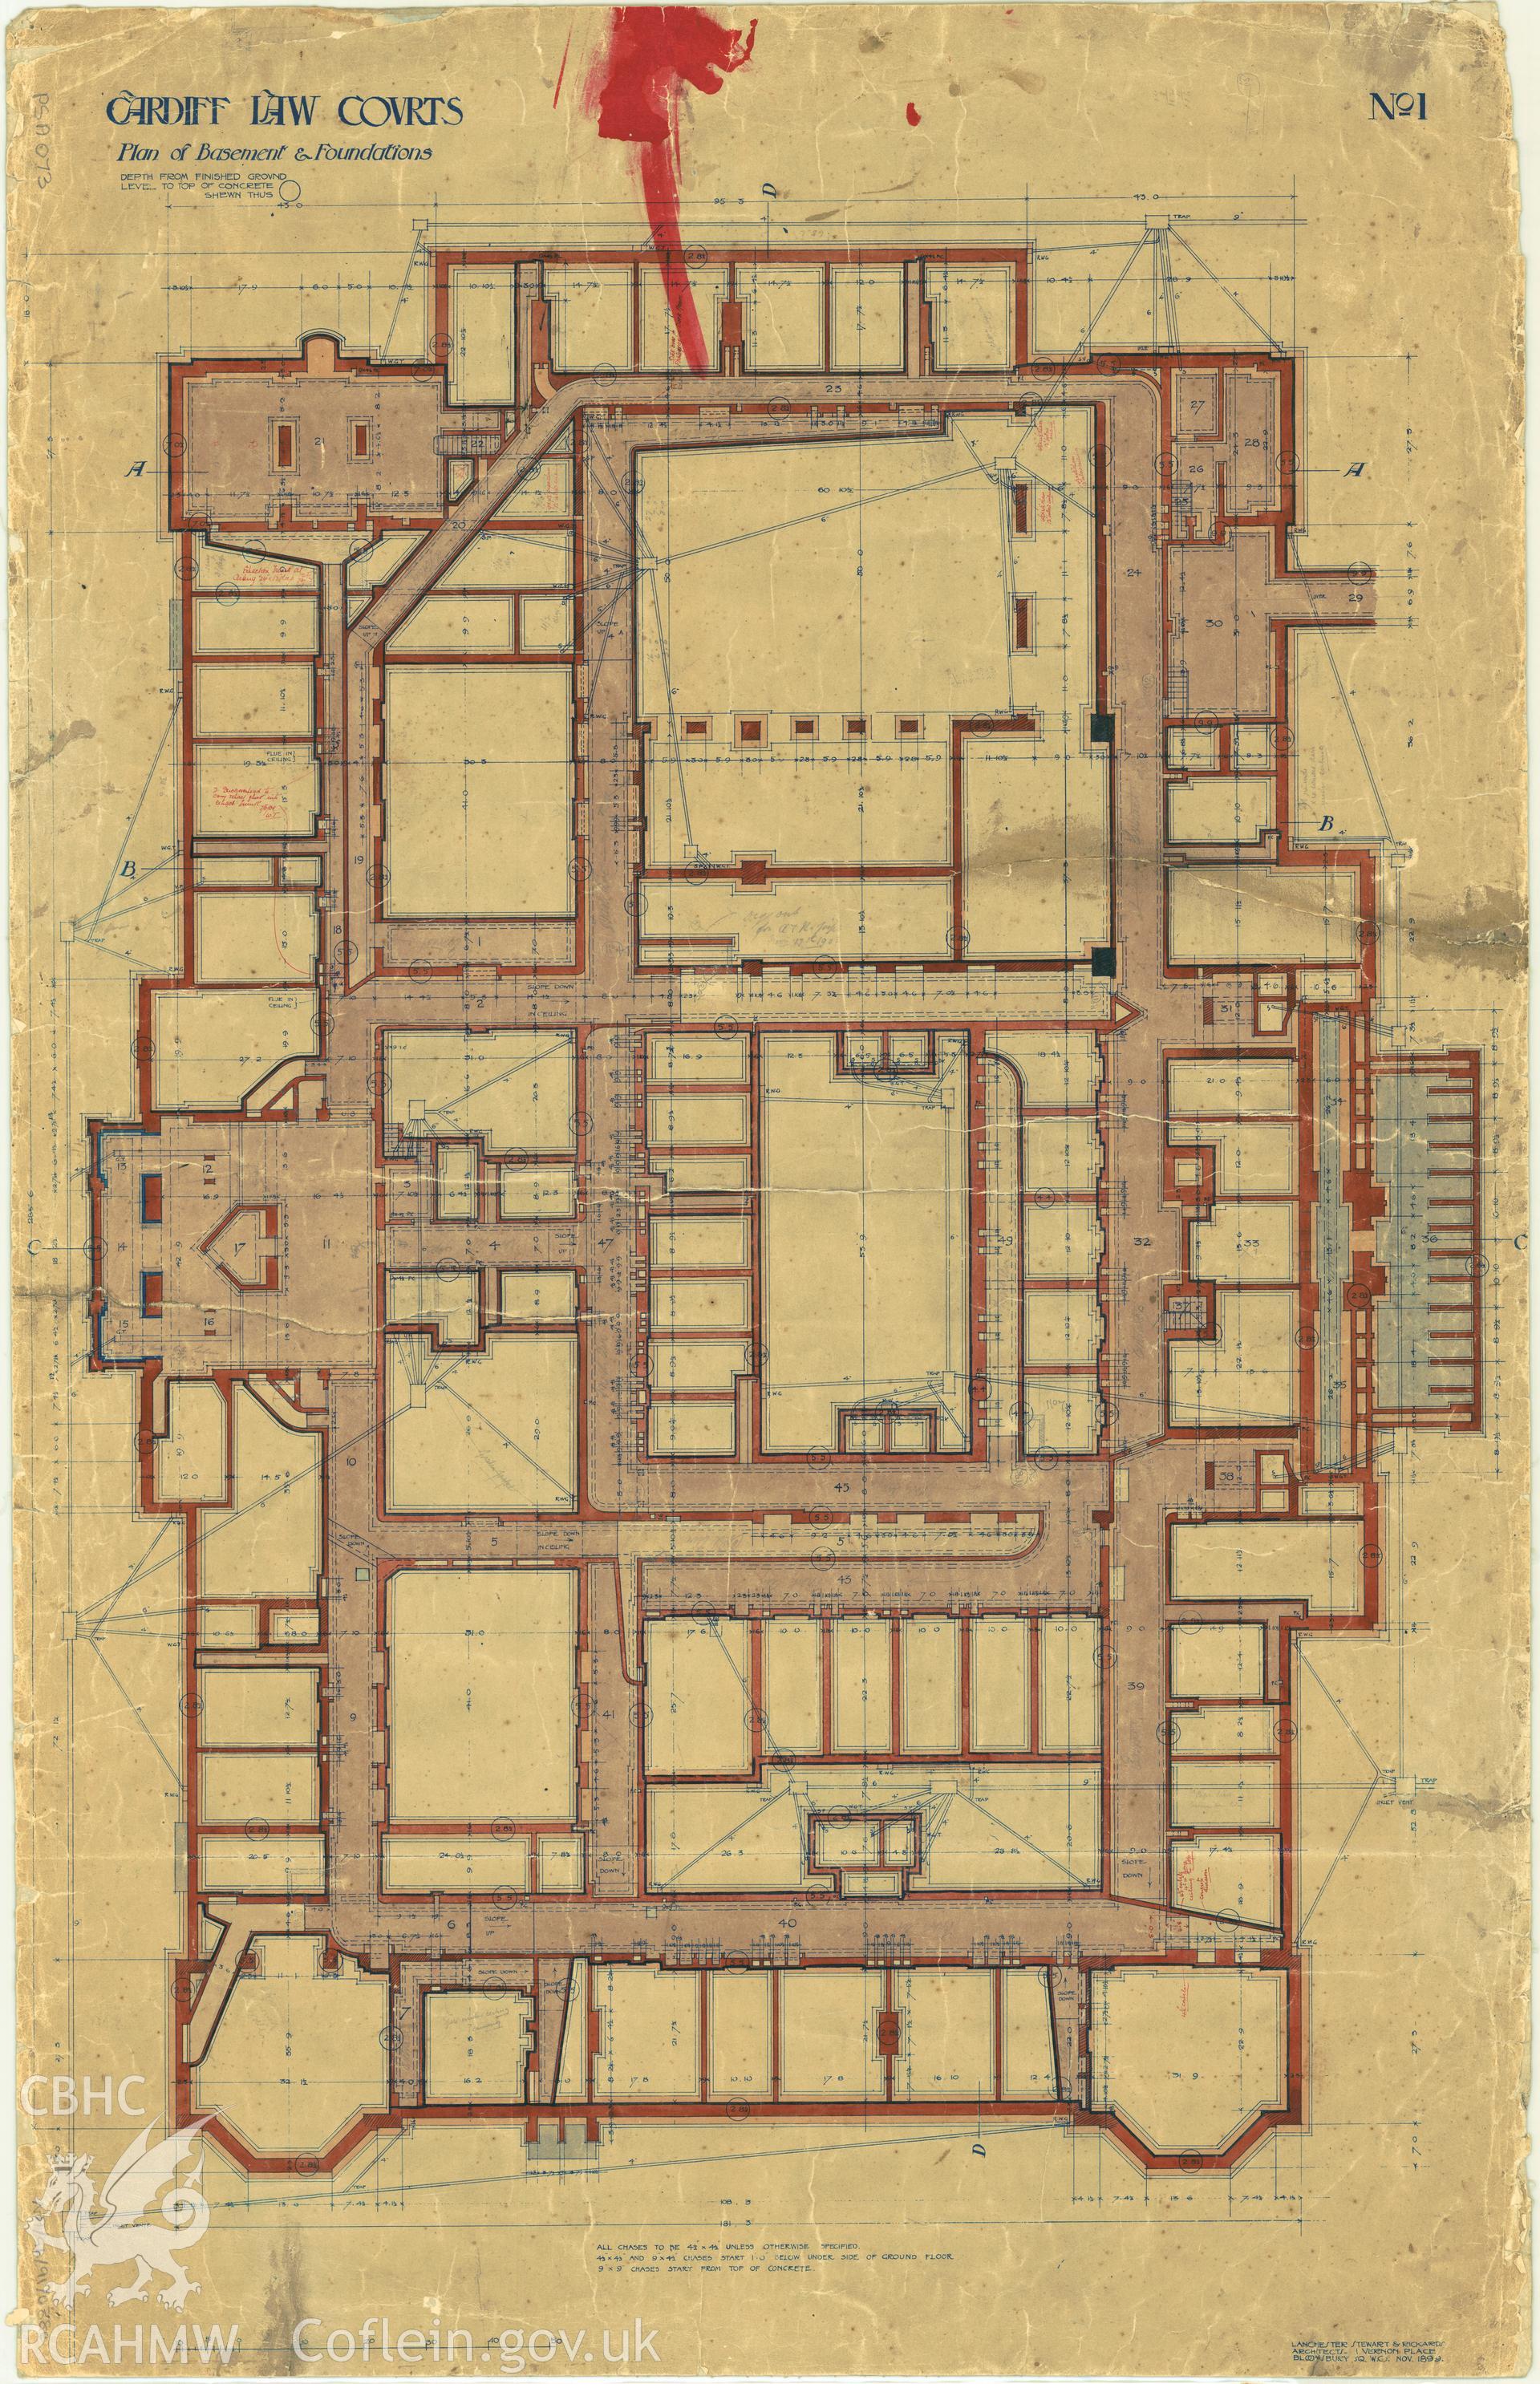 Law Court, Cathays Park, Cardiff; measured drawing showing plan of basement and foundations, produced by Lanchester Stewart and Rickards, 1899.